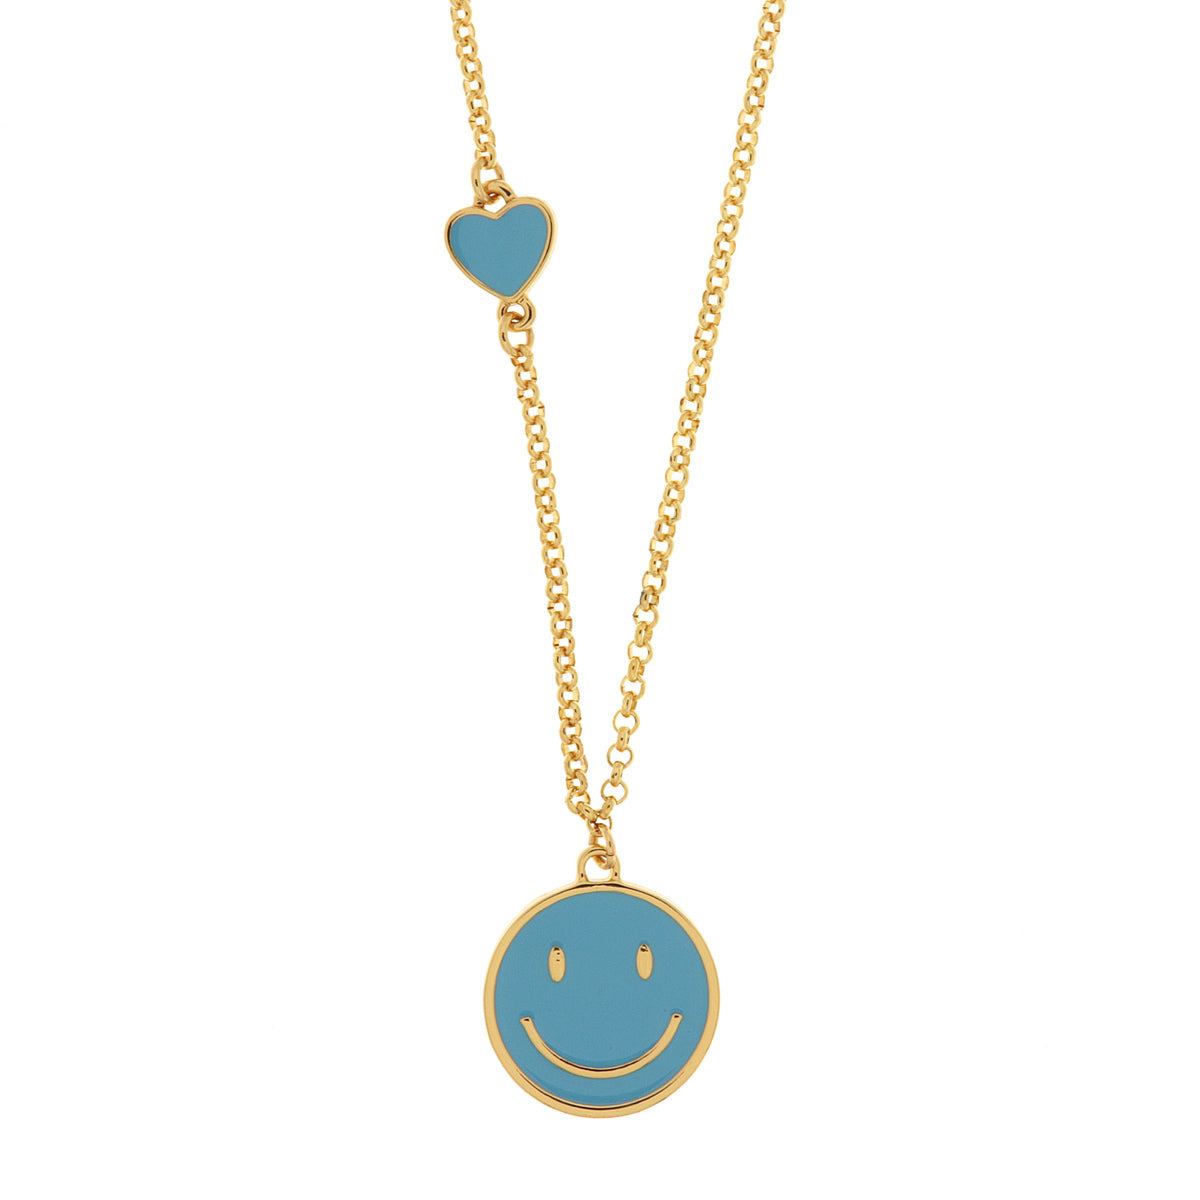 Metal necklace with smile -shaped pendant and blue heart